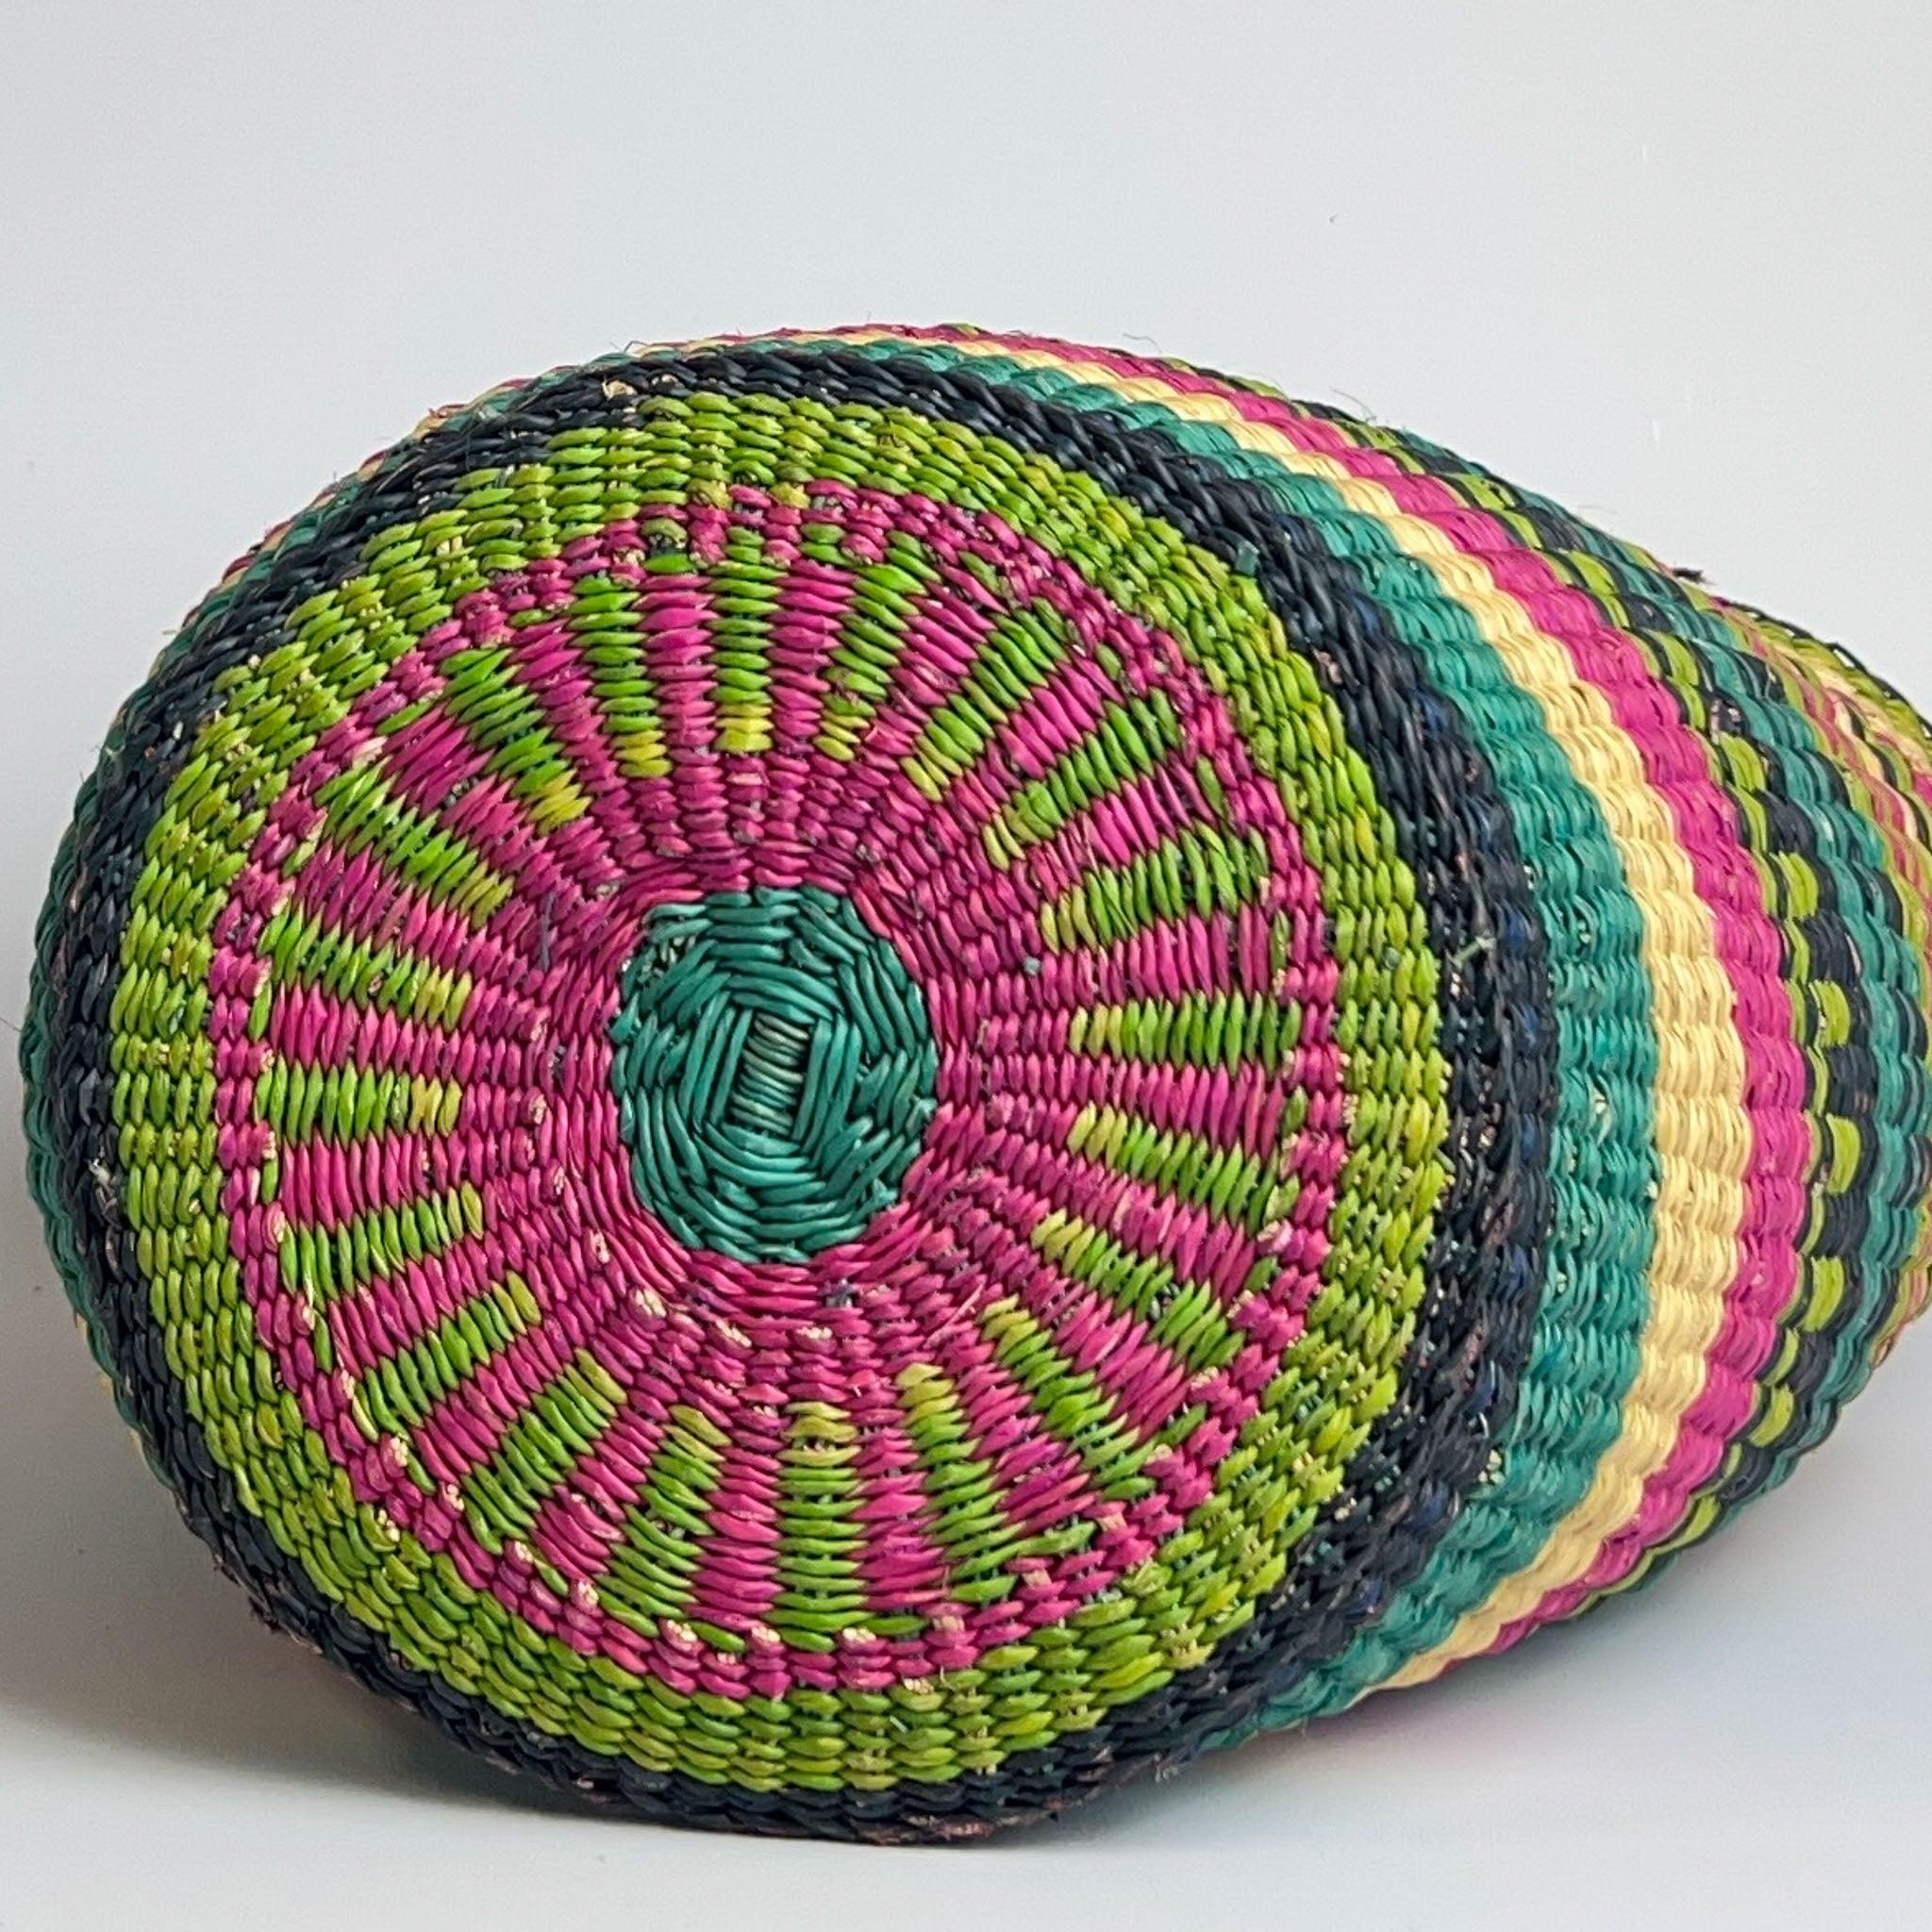 The base view of a traditional African Shopper basket showing off the pretty and colourful design in green and pink.